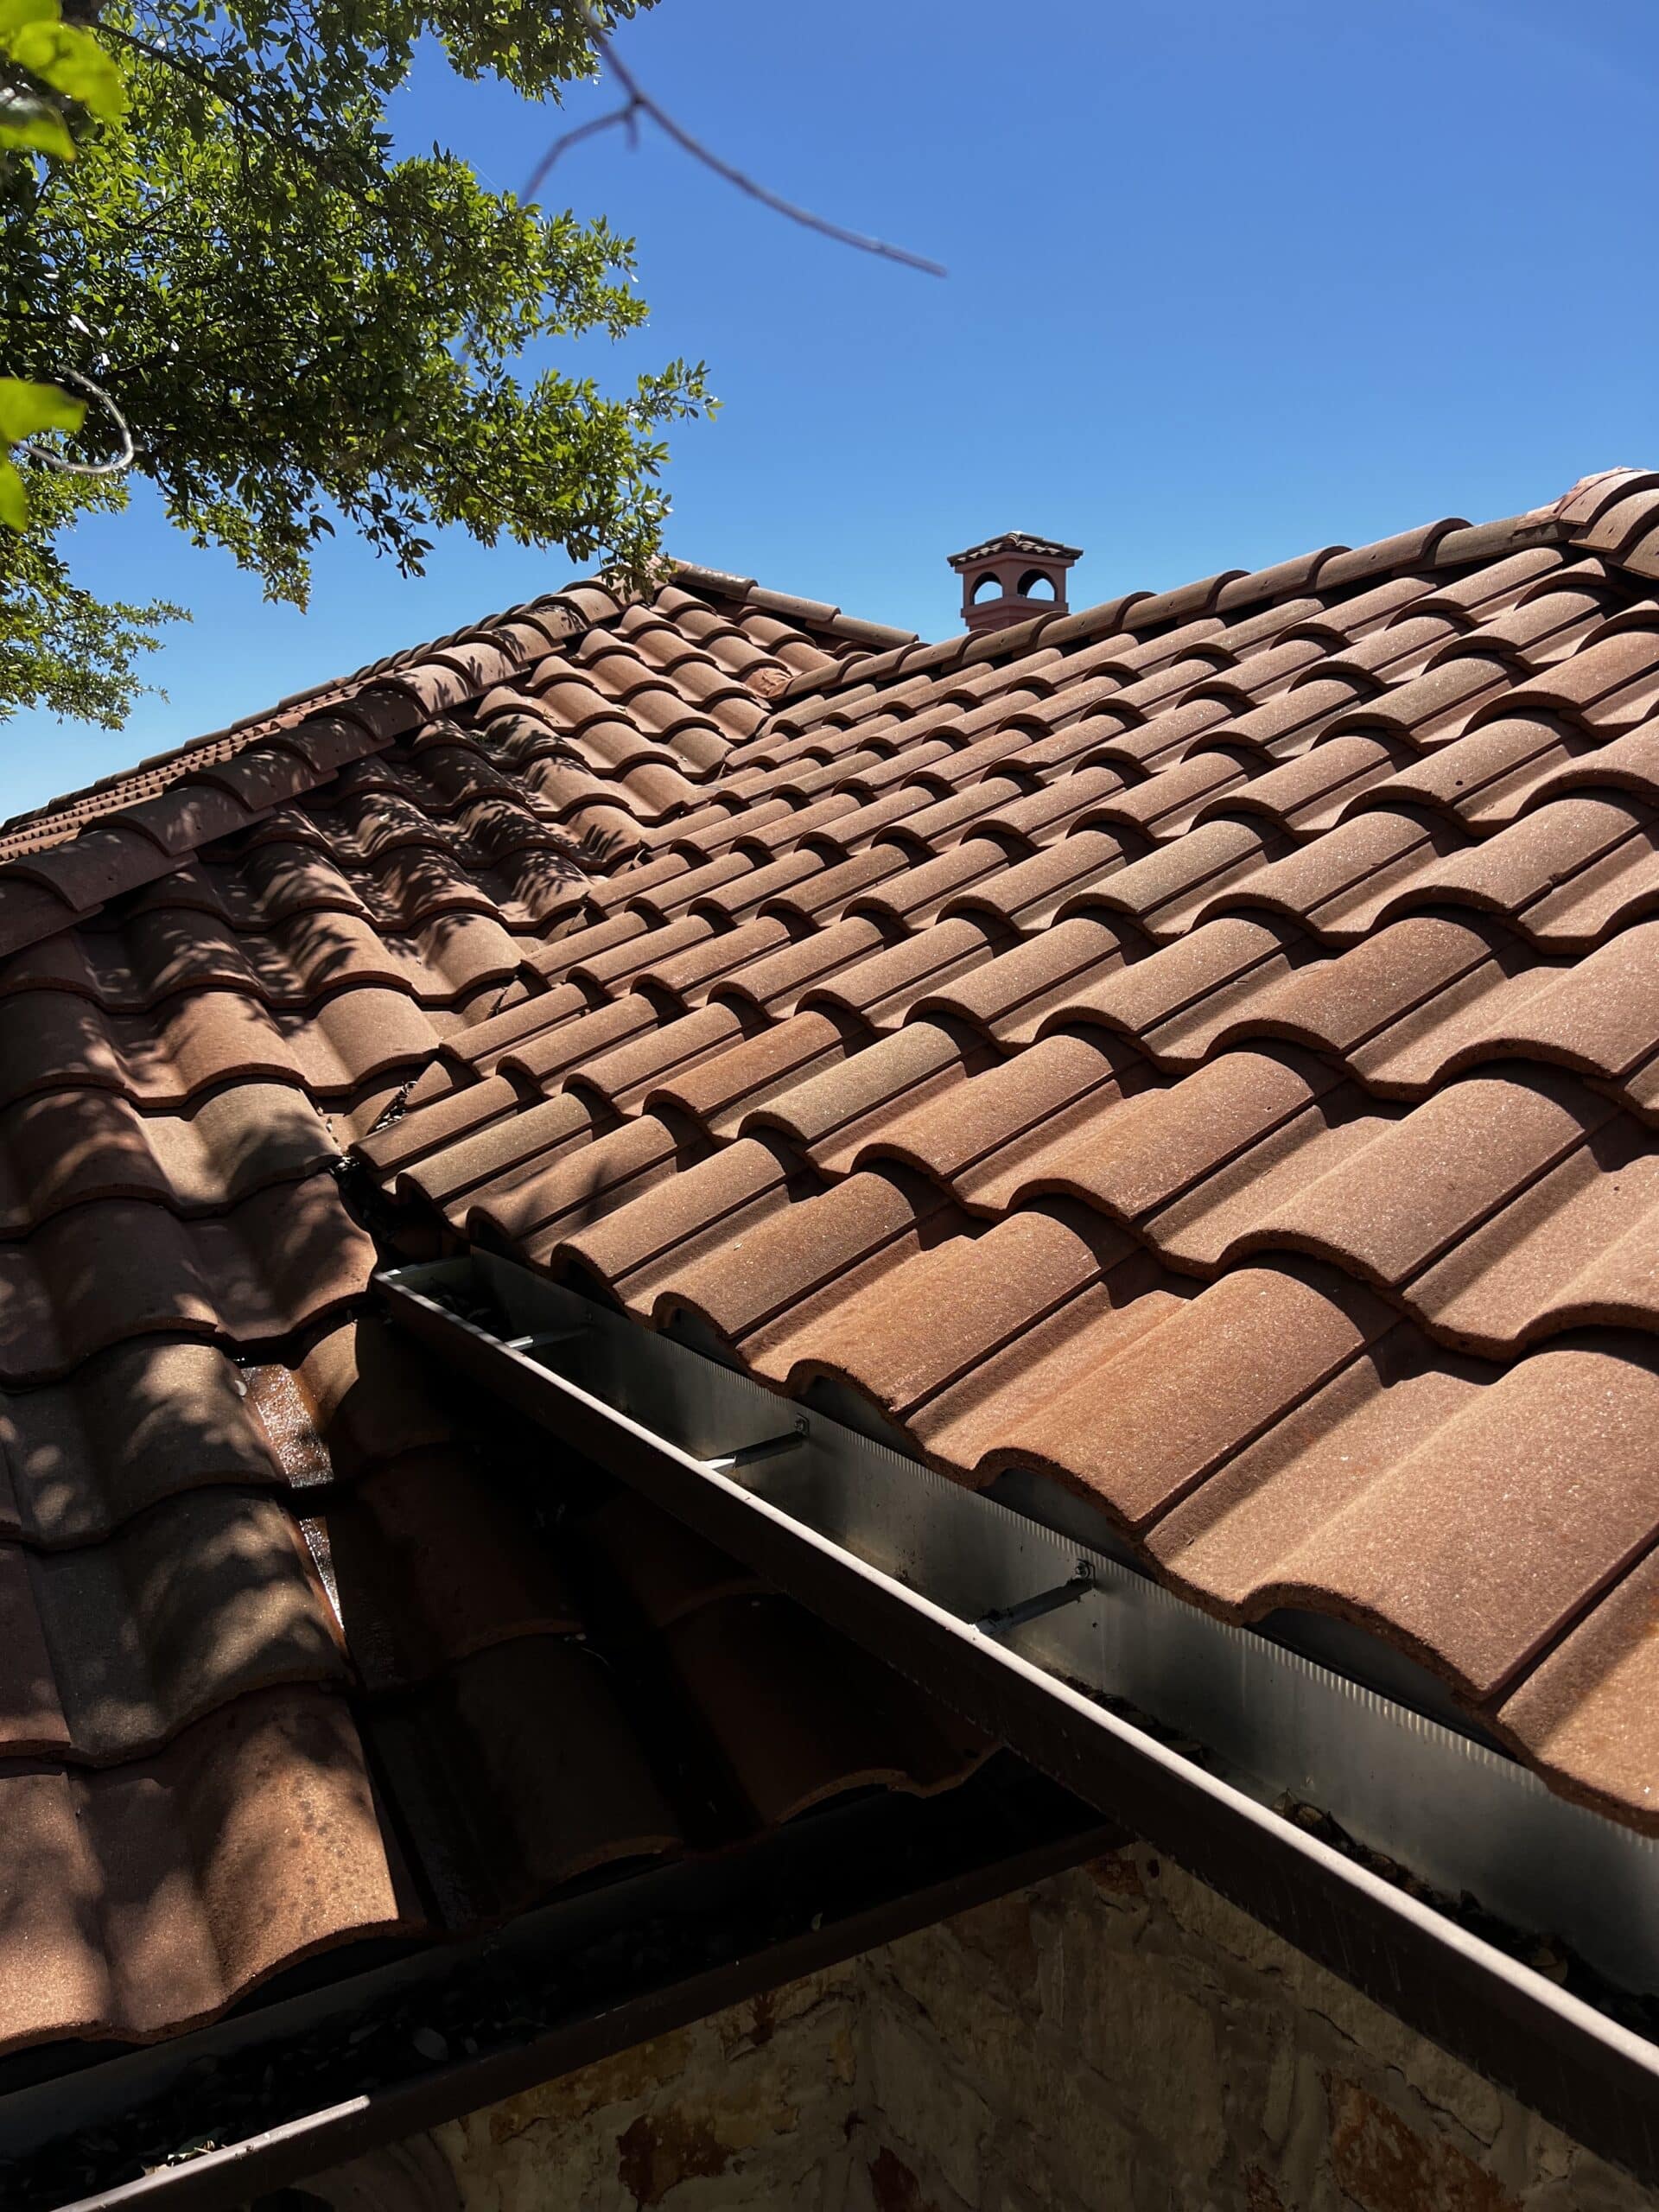 Austin Roof Cleaning Services - After Image